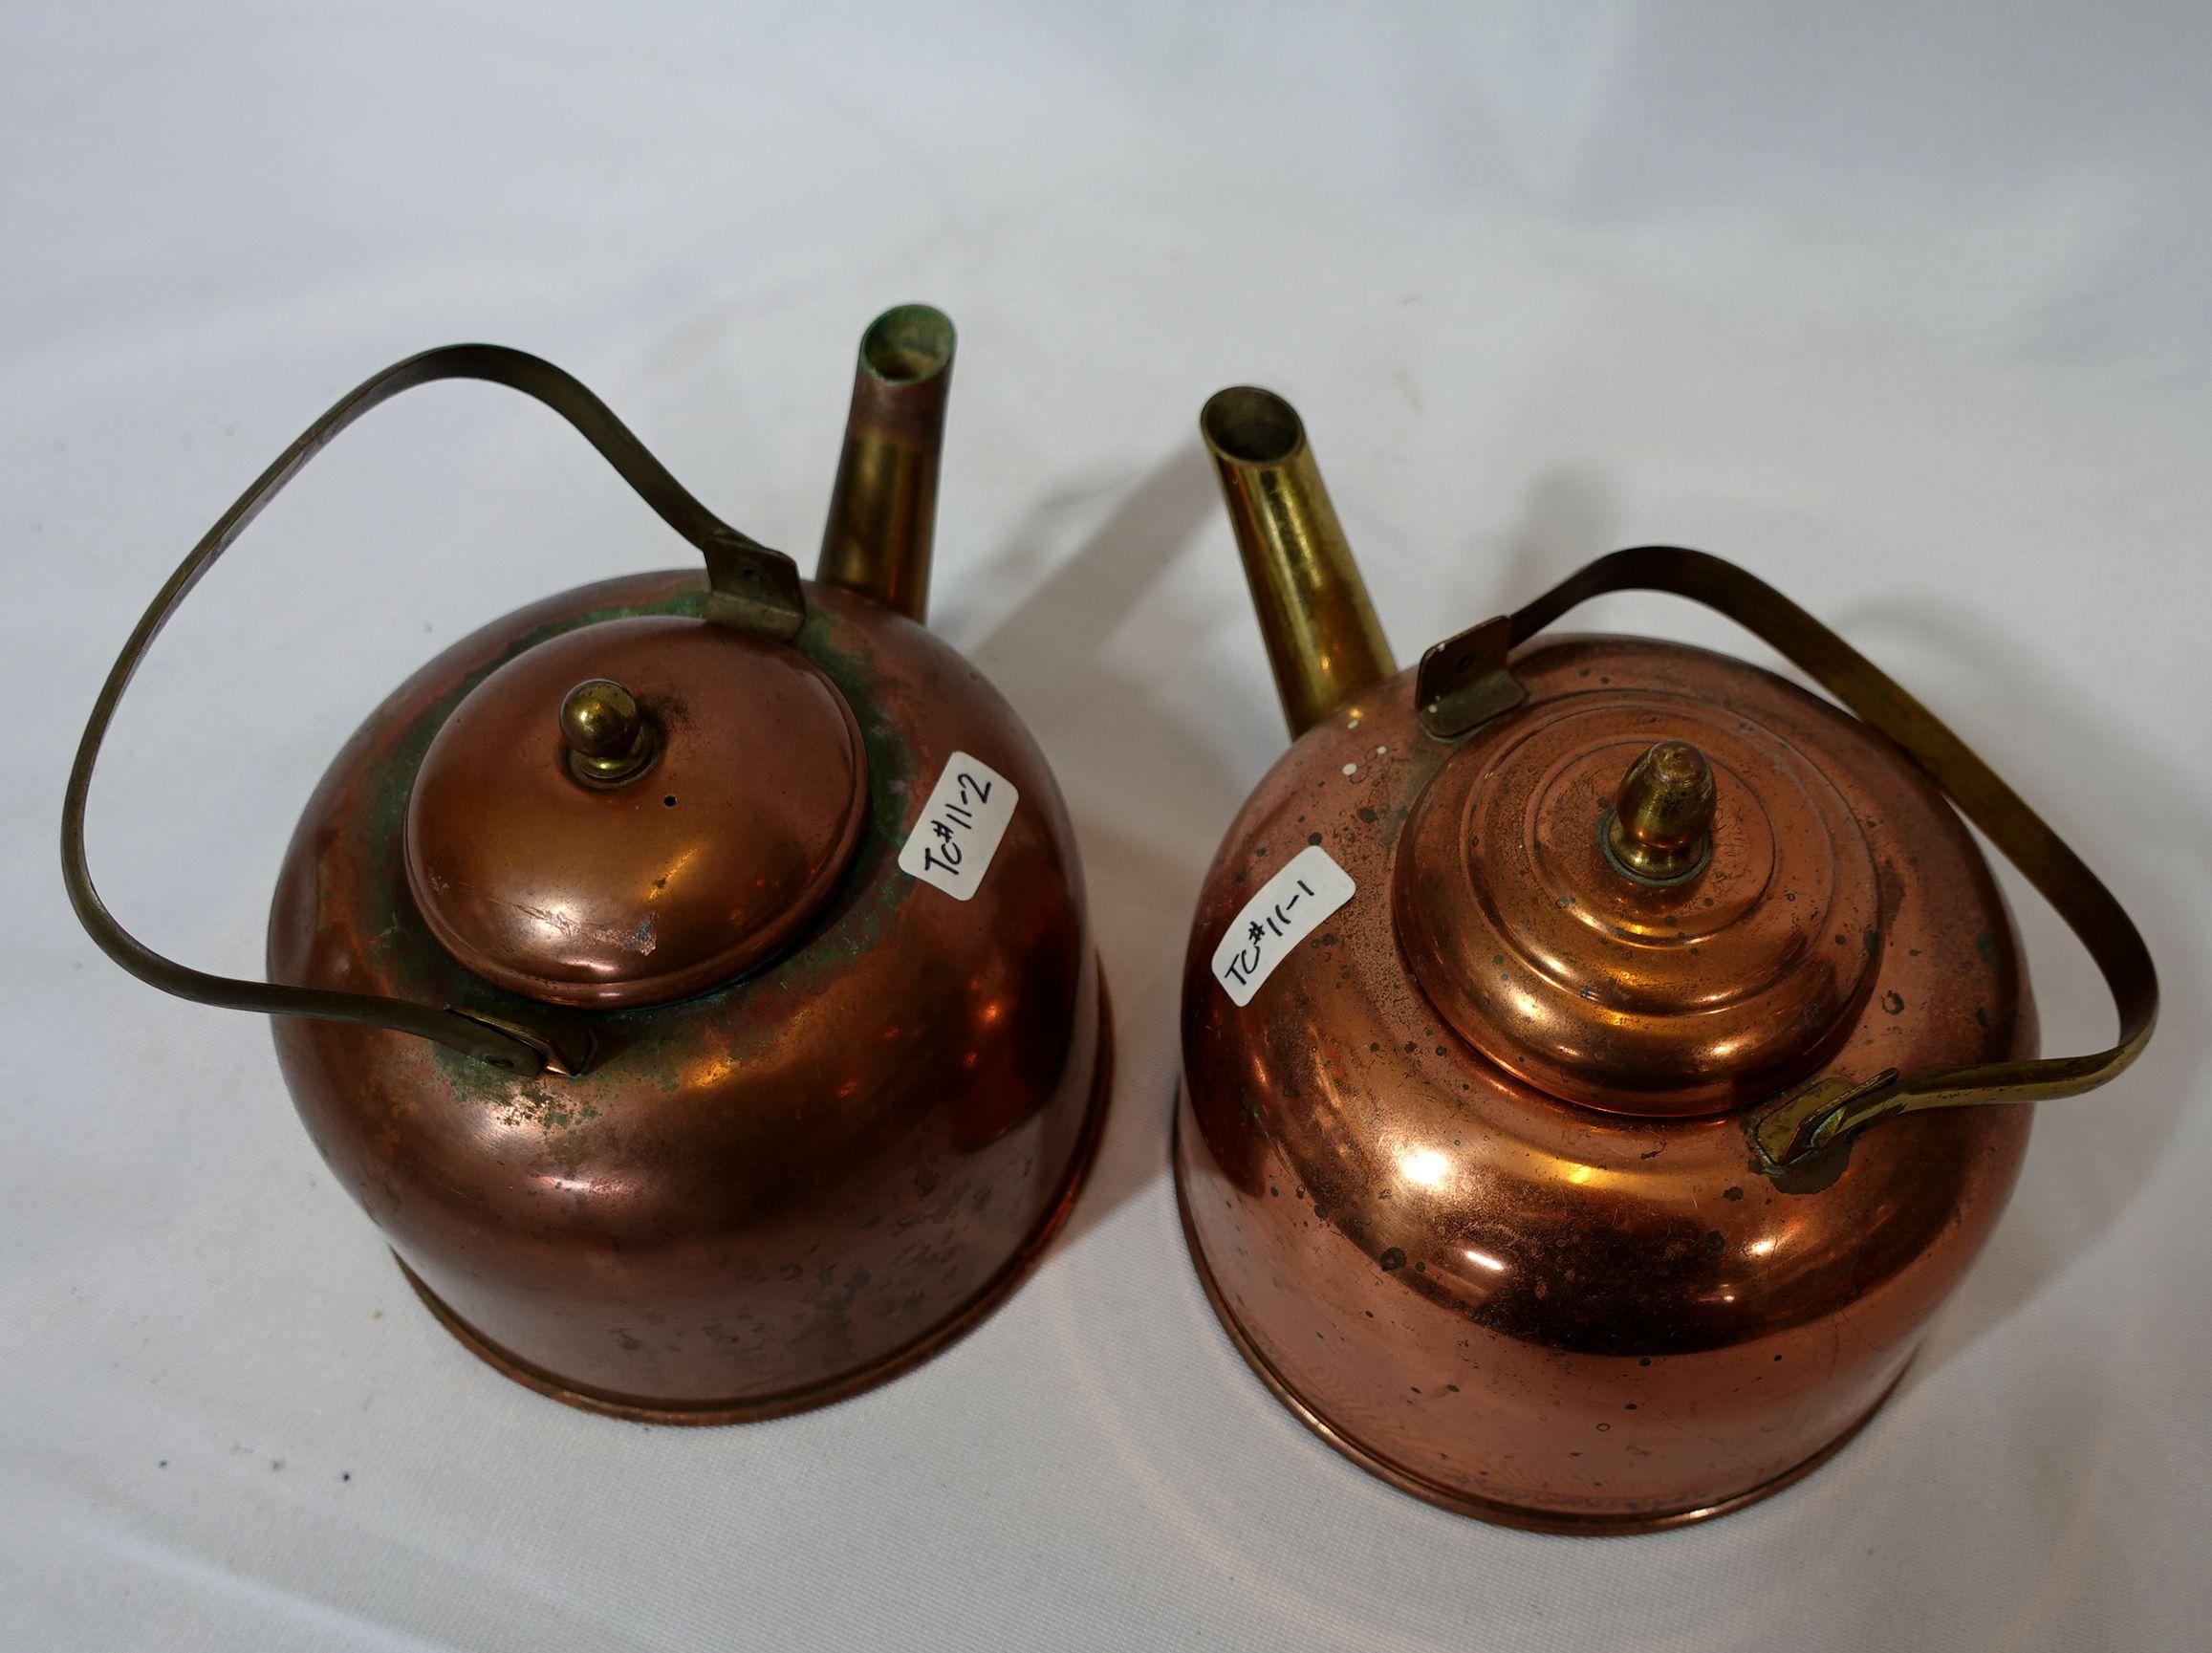 Pair of American Copper Tea Kettle, TC#11-1 & 2 For Sale 6